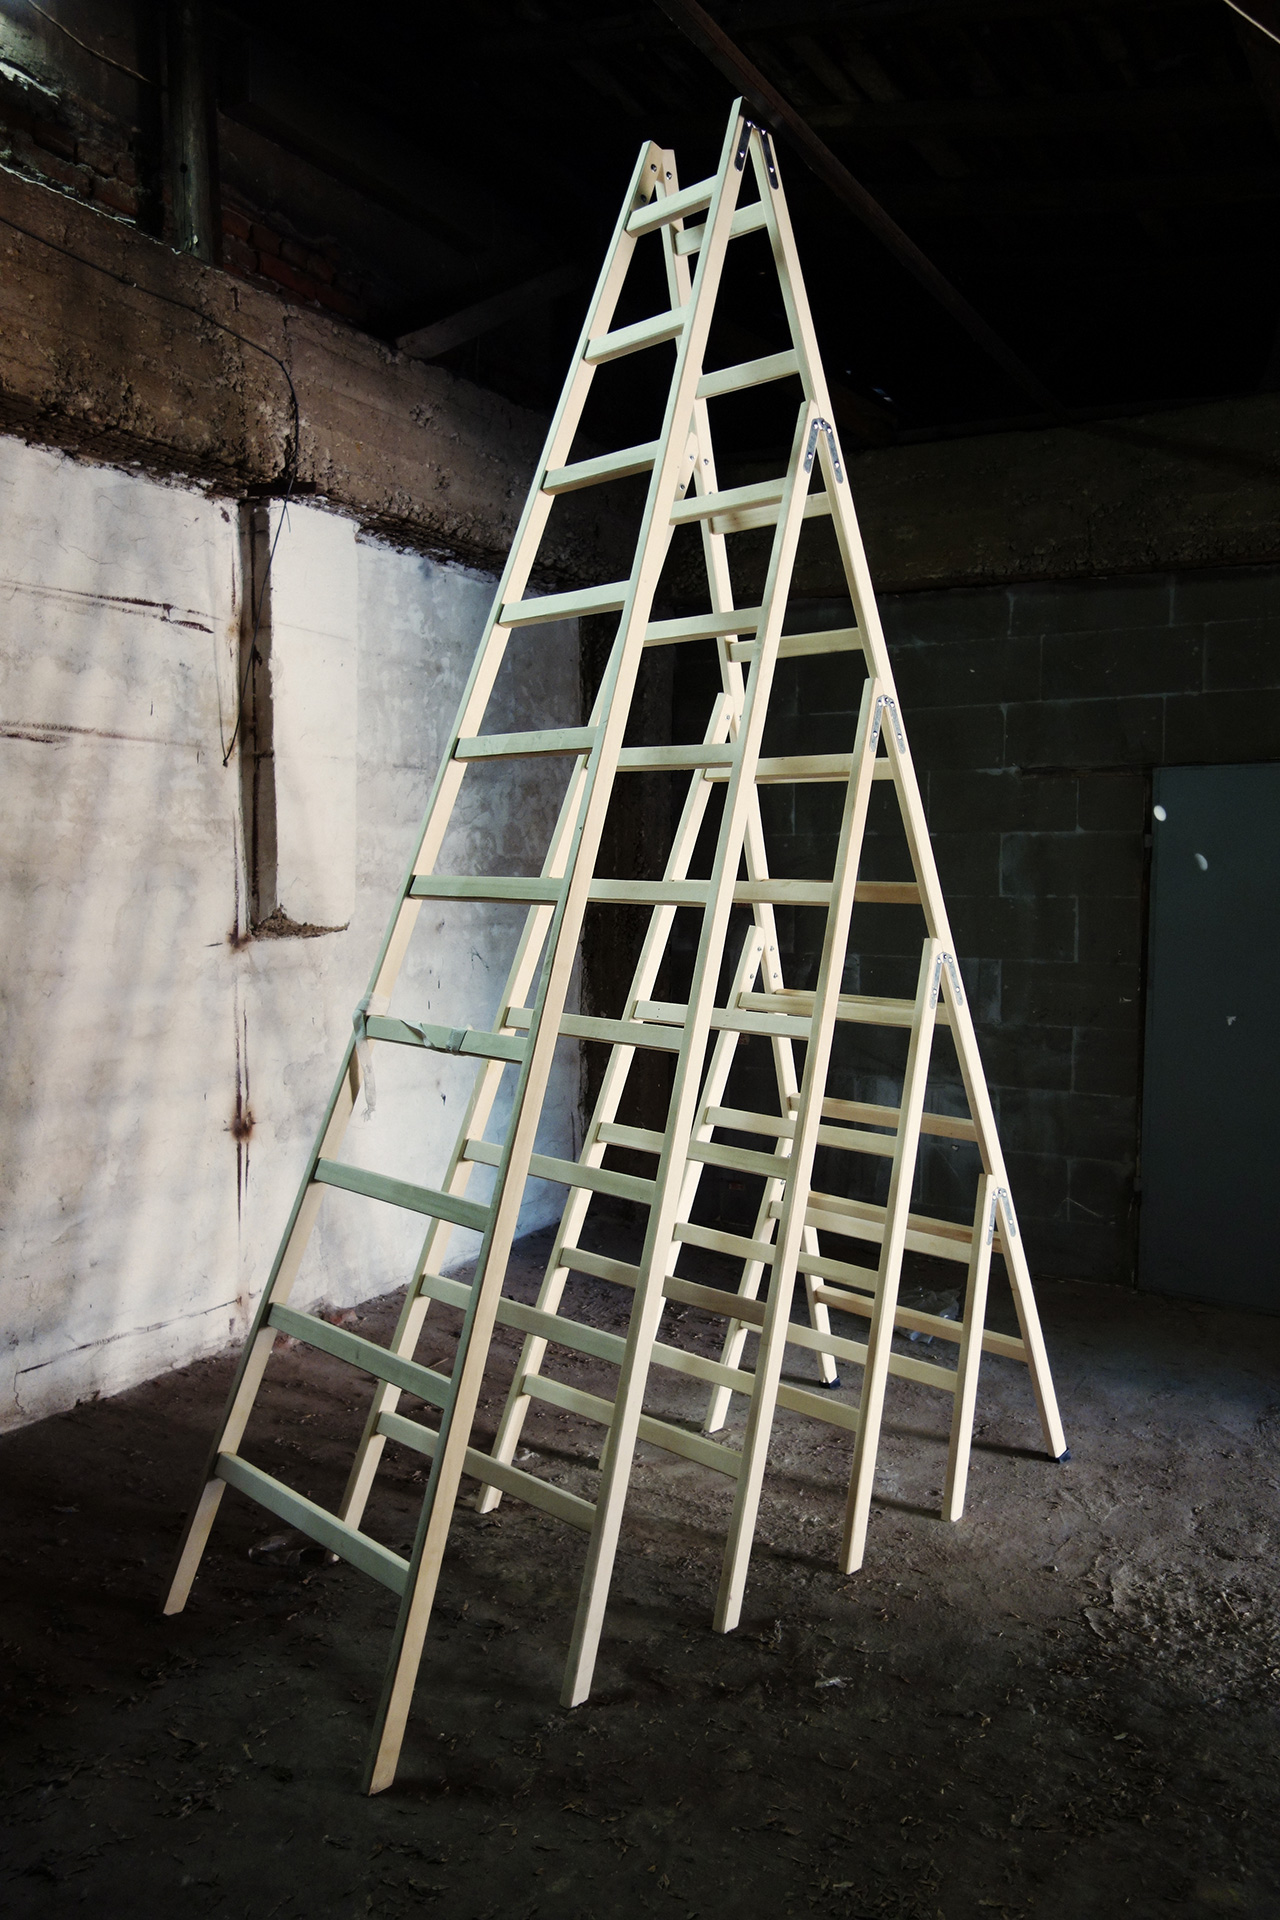 The Ladder, 2015